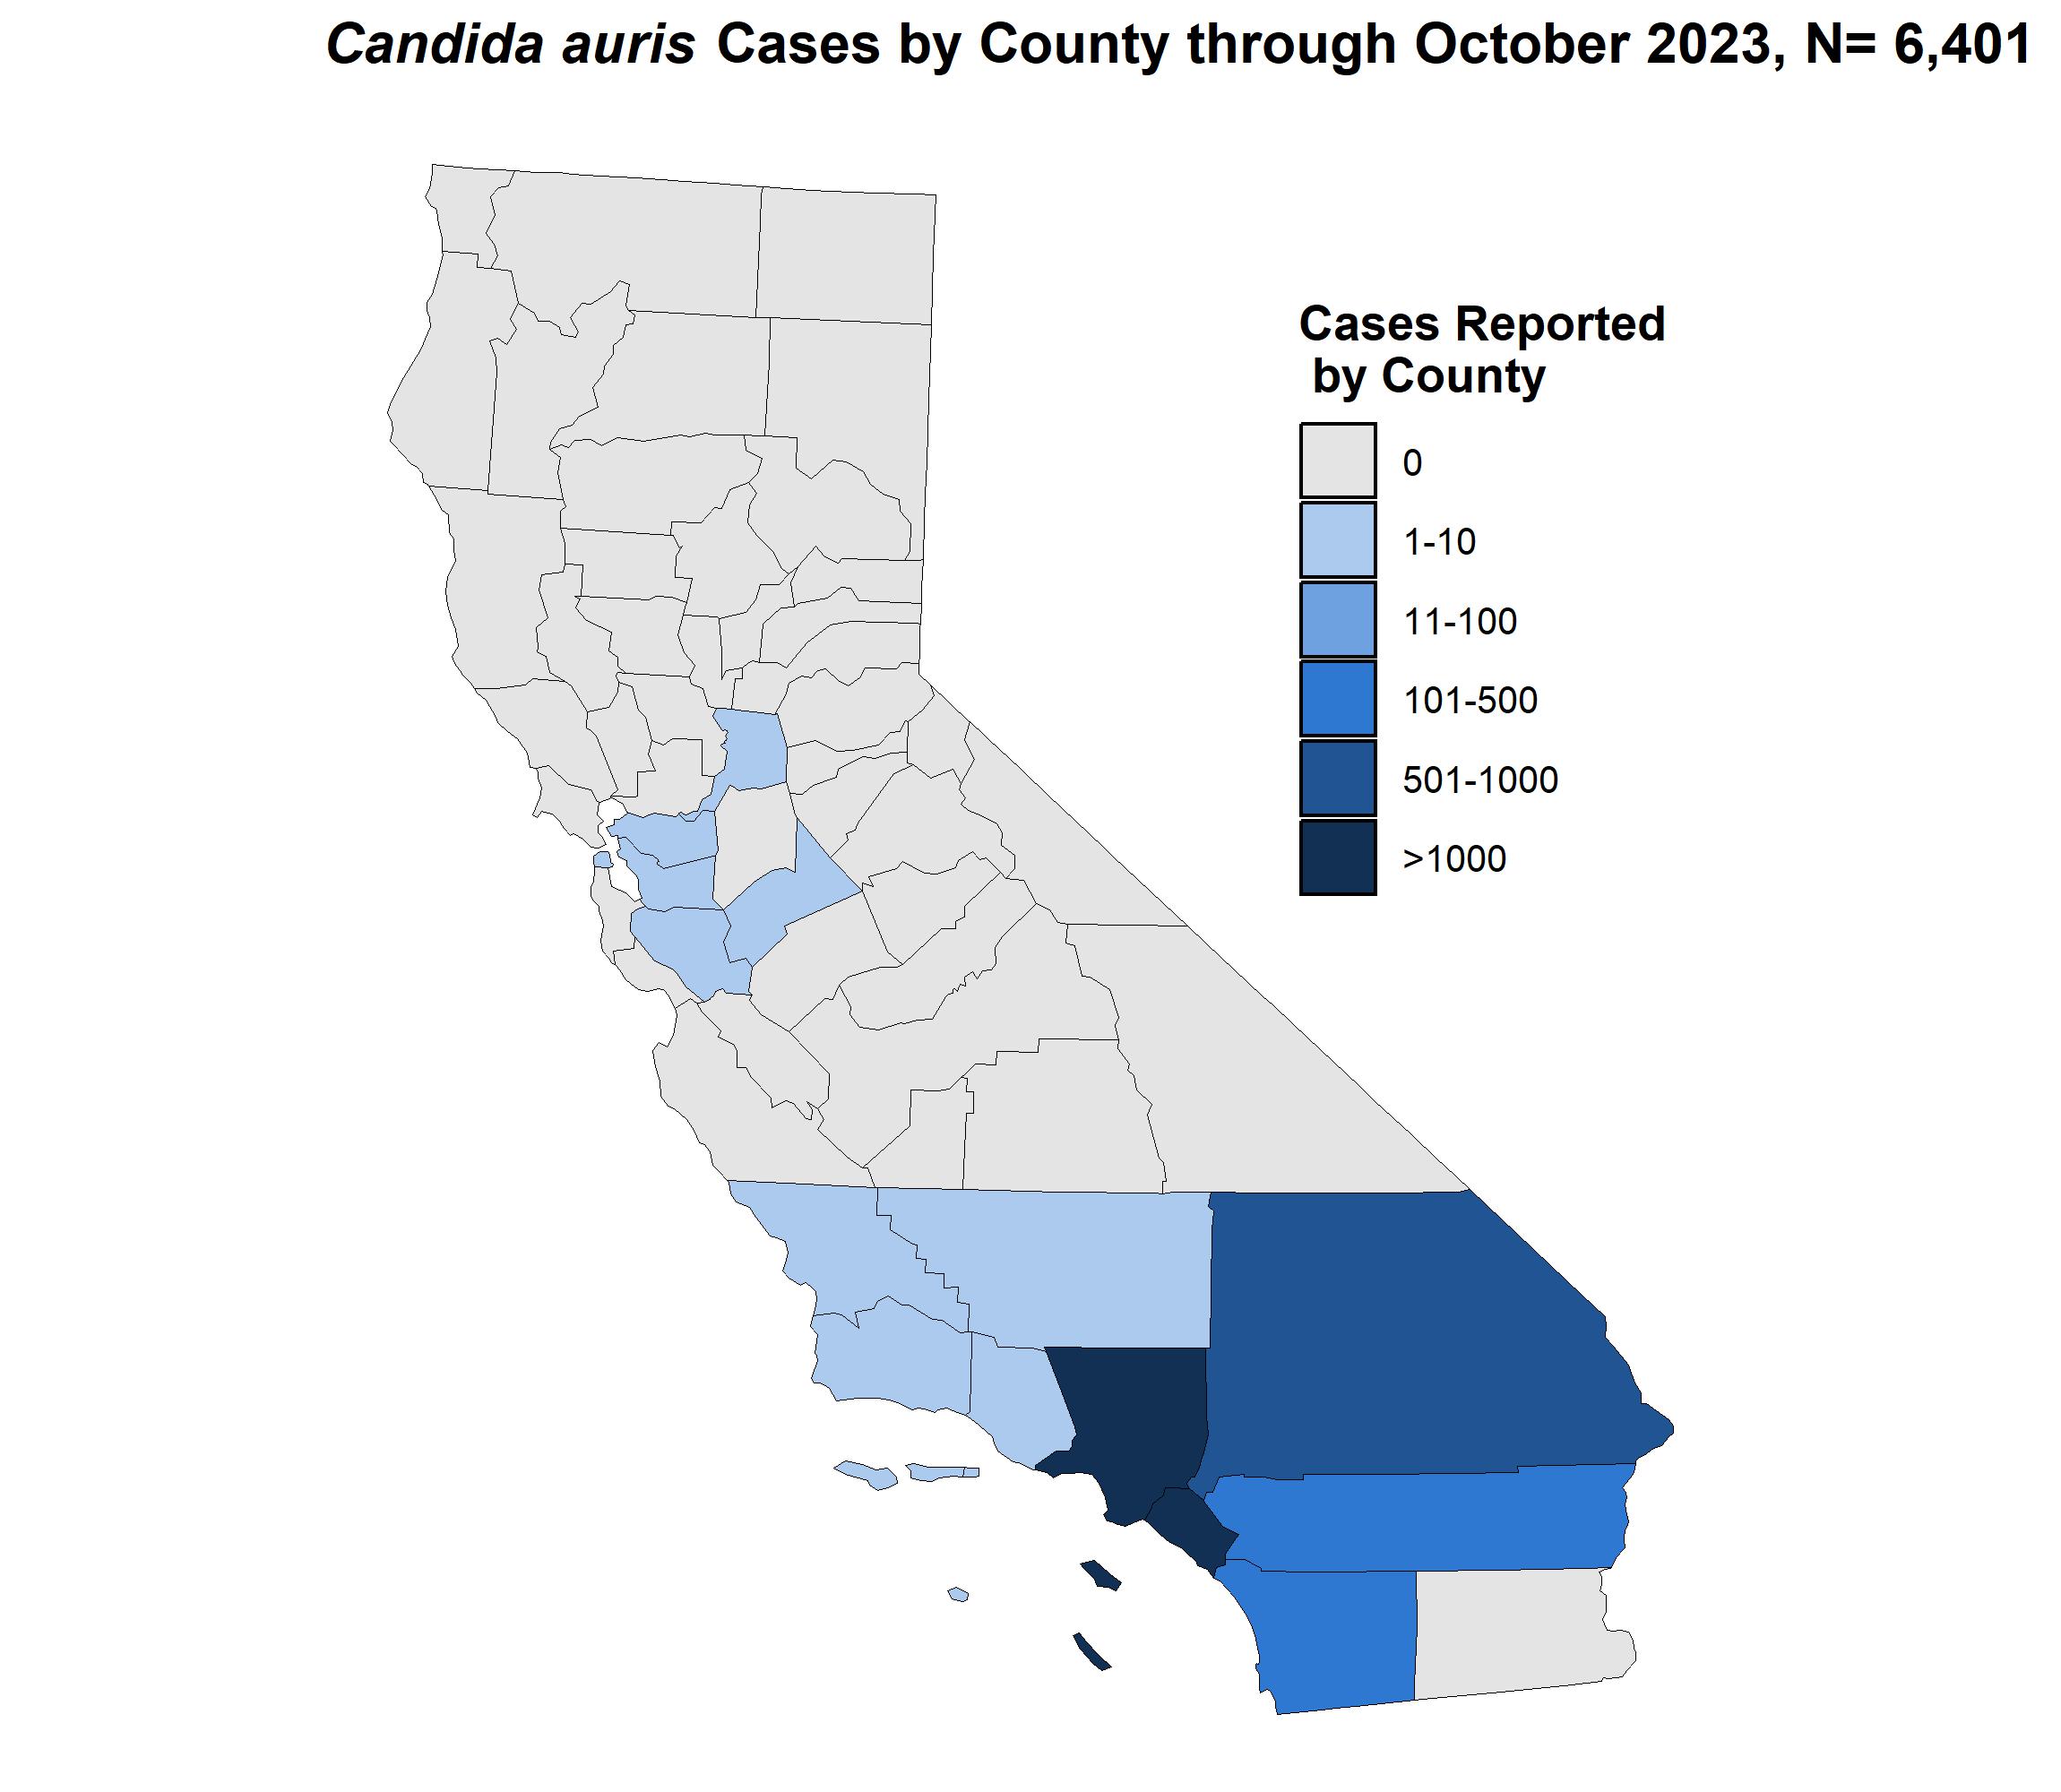 Map of California, divided by counties. Counties are colored by case counts through the end of October 2023. 